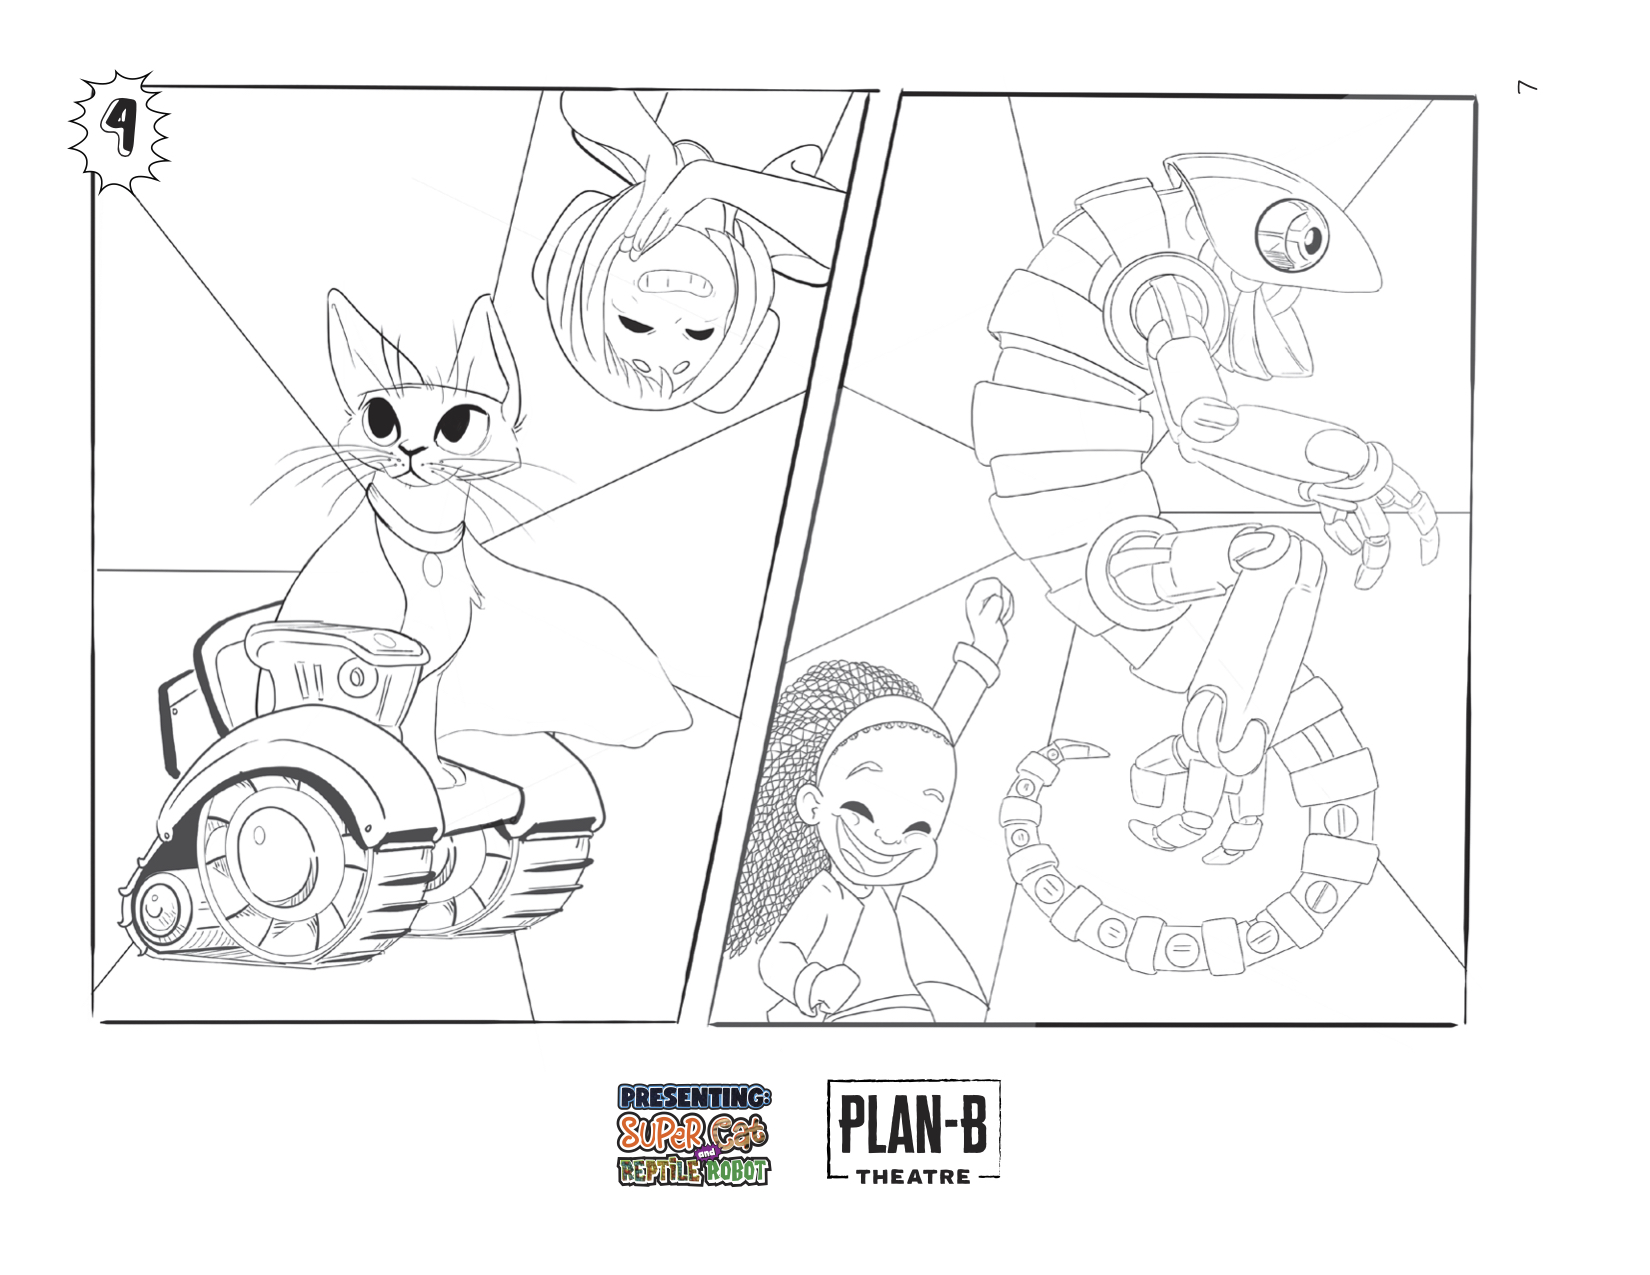 PRESENTING: SUPER CAT & REPTILE ROBOT coloring page with all female cast.